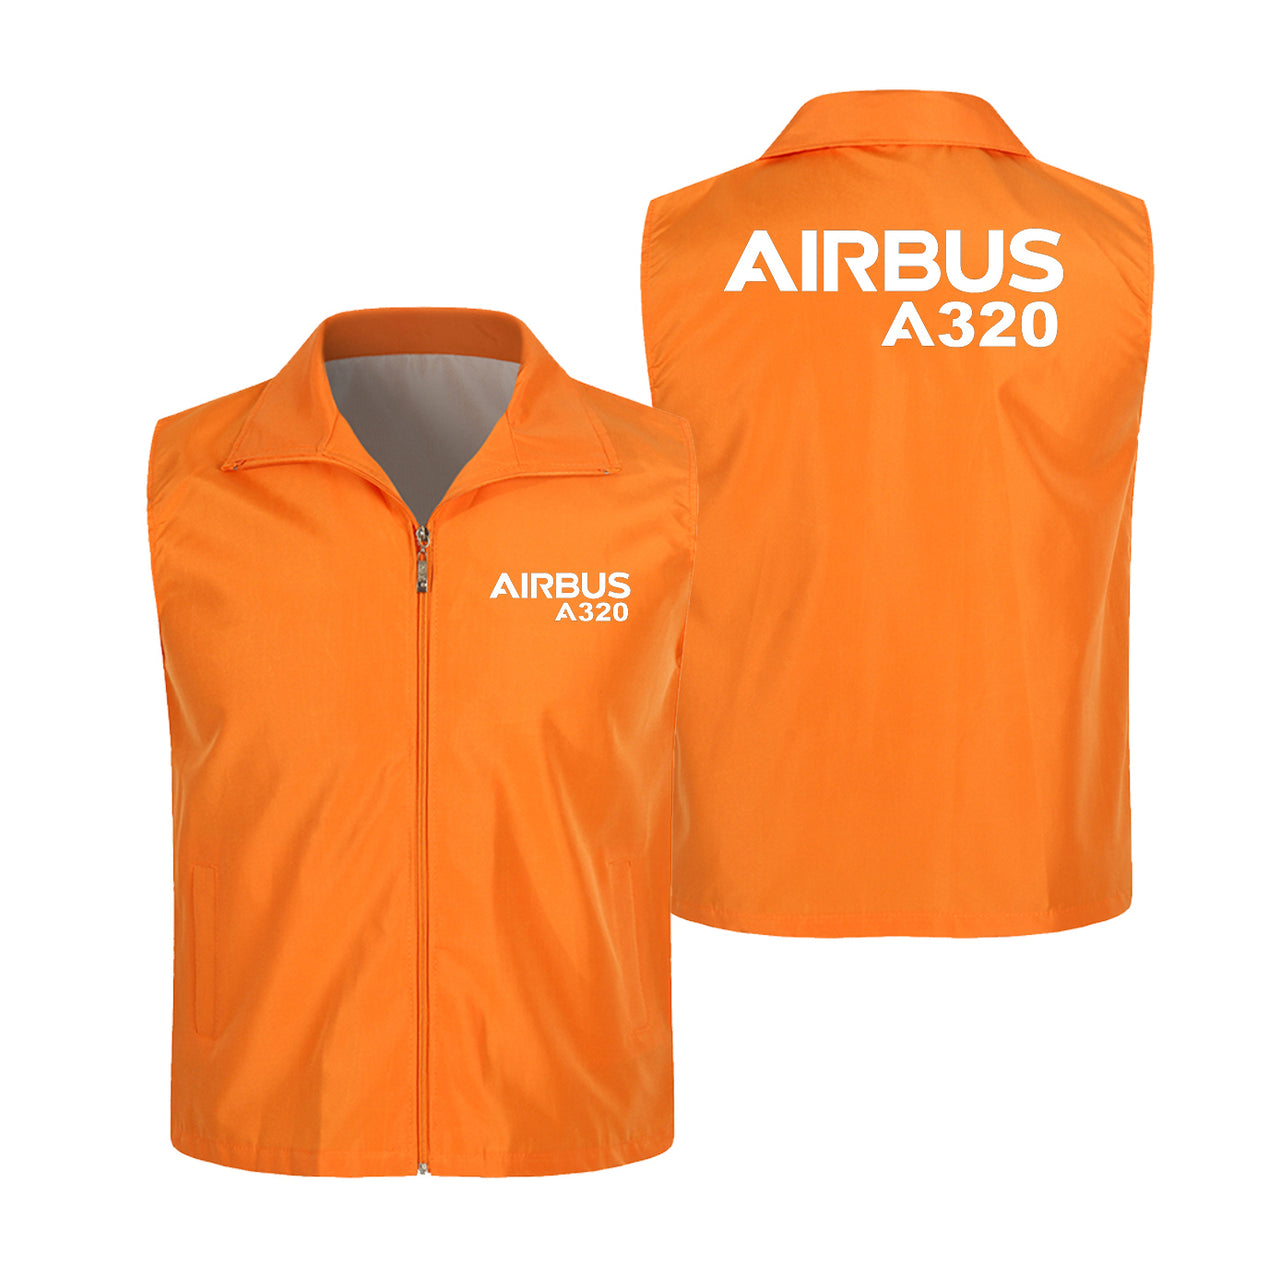 Airbus A320 & Text Designed Thin Style Vests